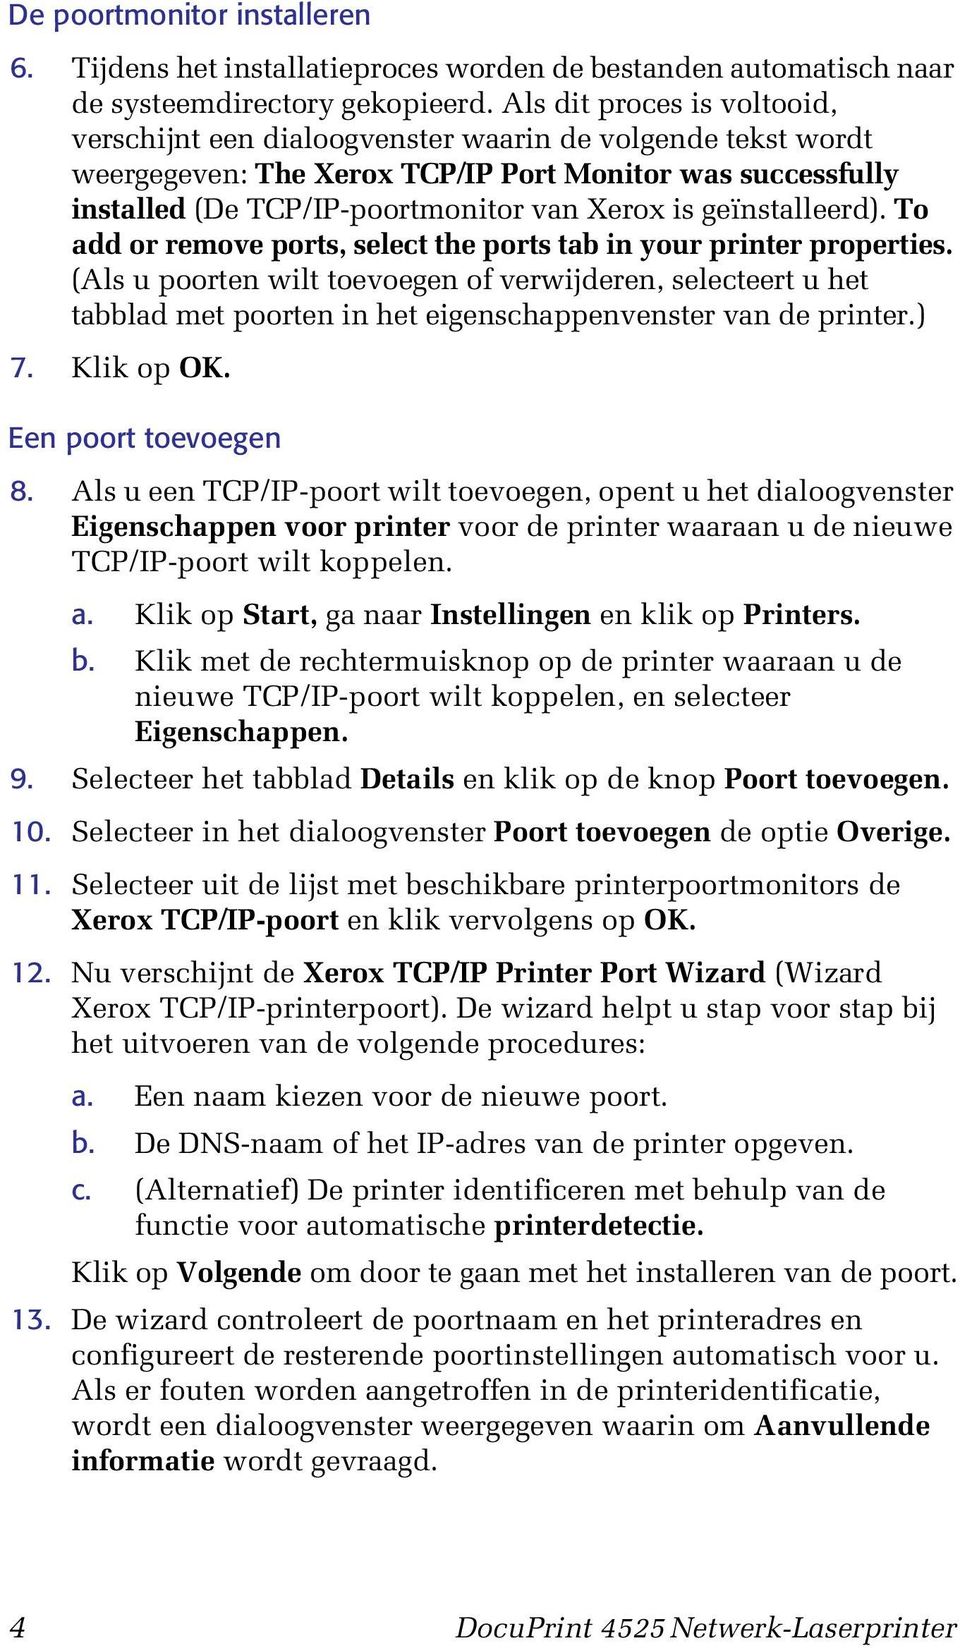 geïnstalleerd). To add or remove ports, select the ports tab in your printer properties.